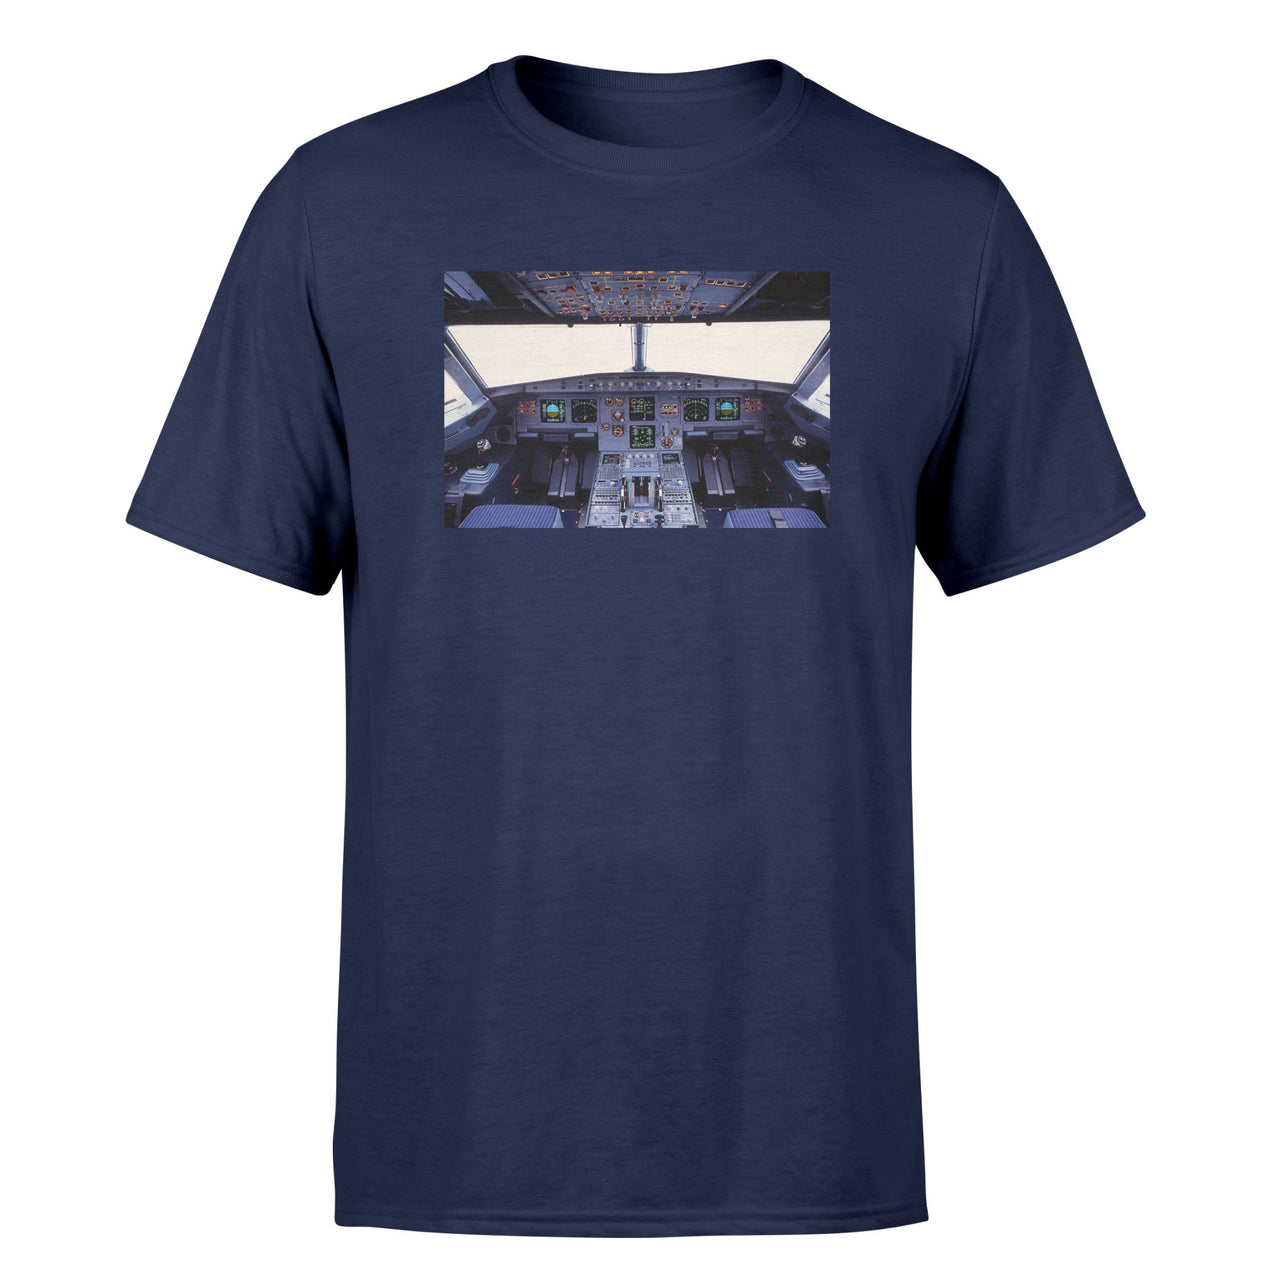 Airbus A320 Cockpit (Wide) Designed T-Shirts